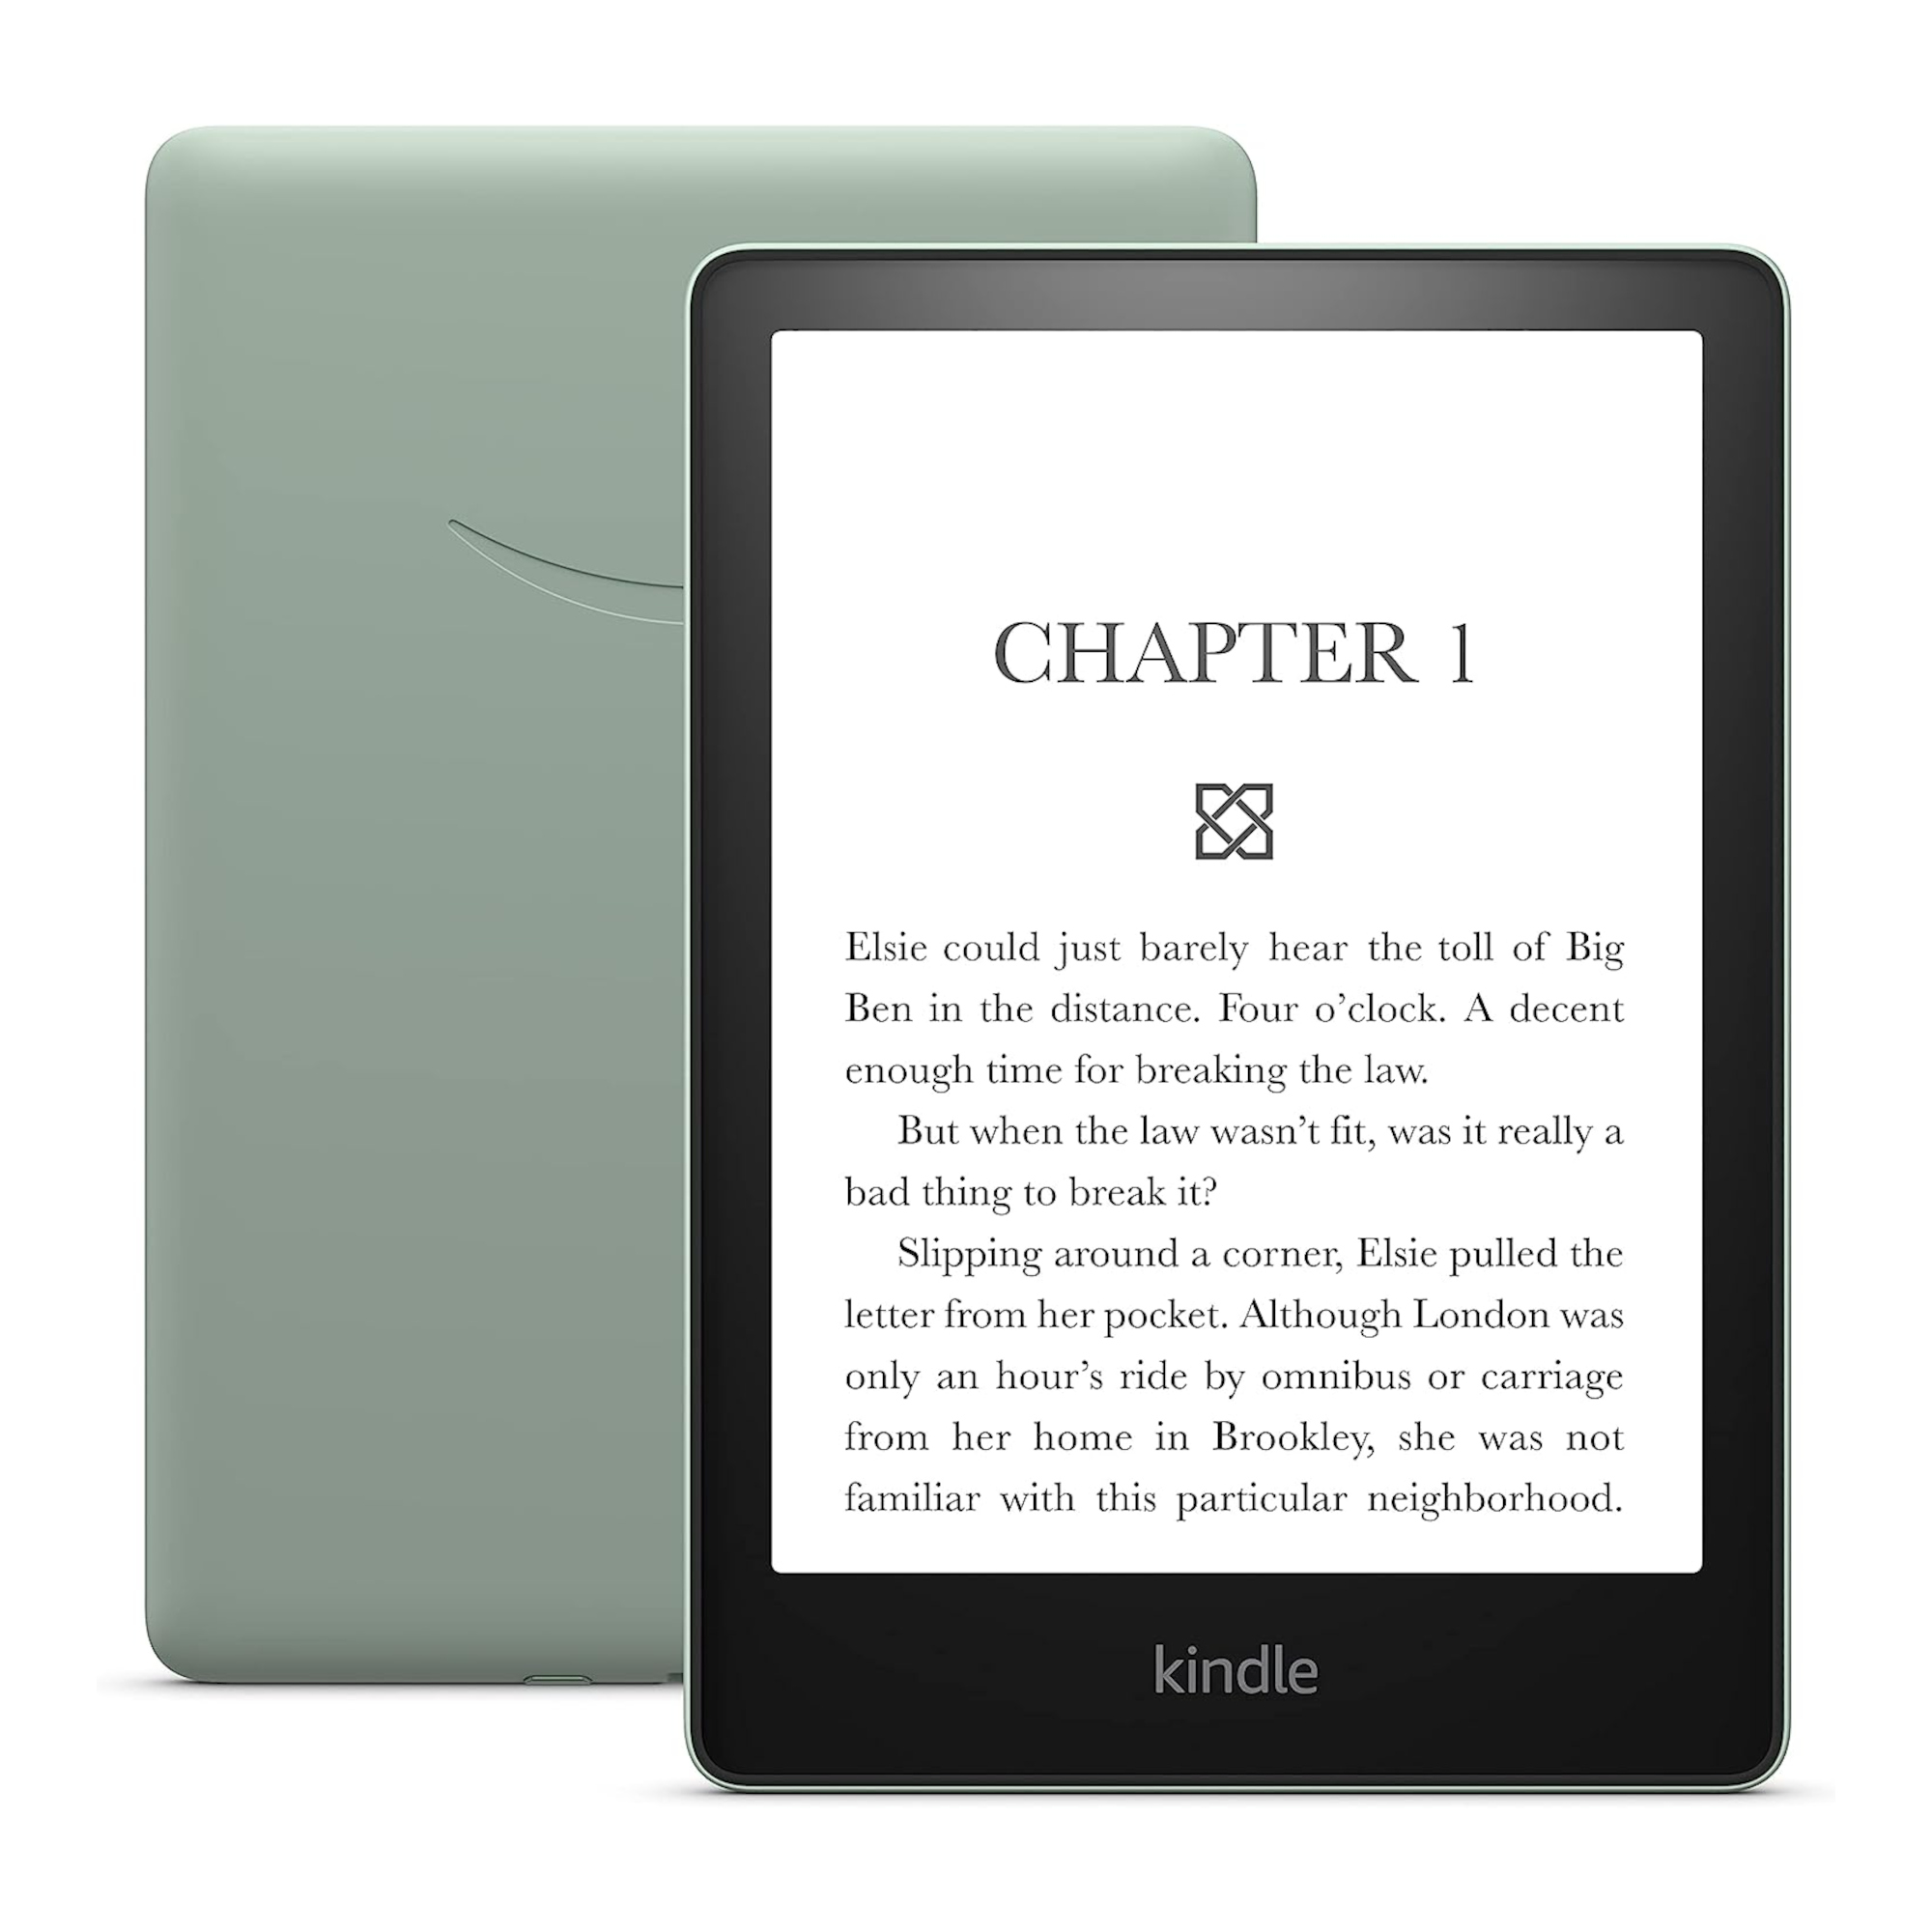 ebook reader new kindle glare 6, touch screen, 8th generation, wi fi, negru eBook Reader Amazon Kindle Paperwhite 2021, 16GB, Wi-Fi, Bluetooth, Green